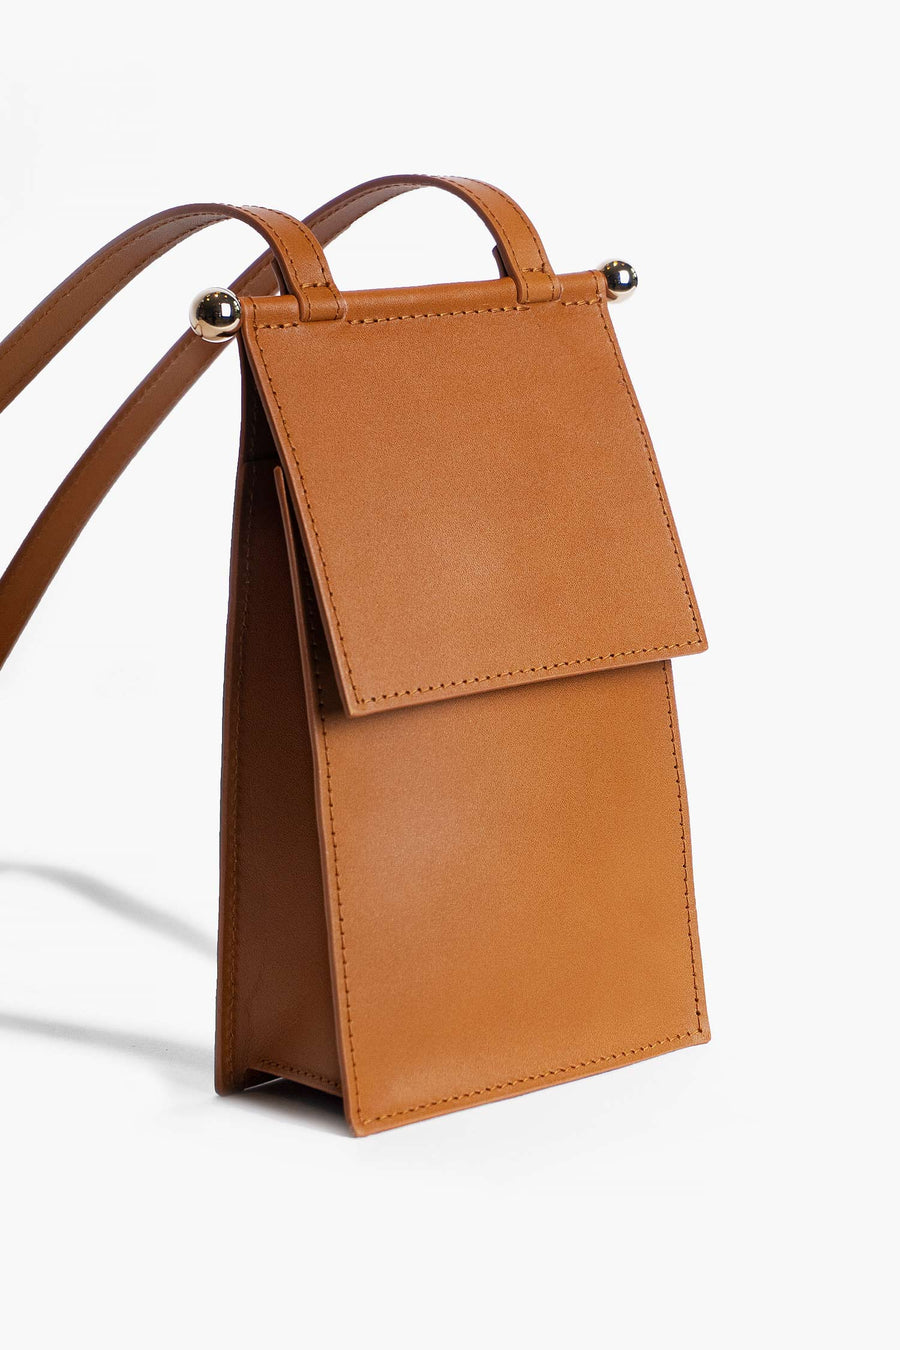 Craftsmanship at its finest: Sustainable mini bag SMÁKA made in Germany. 